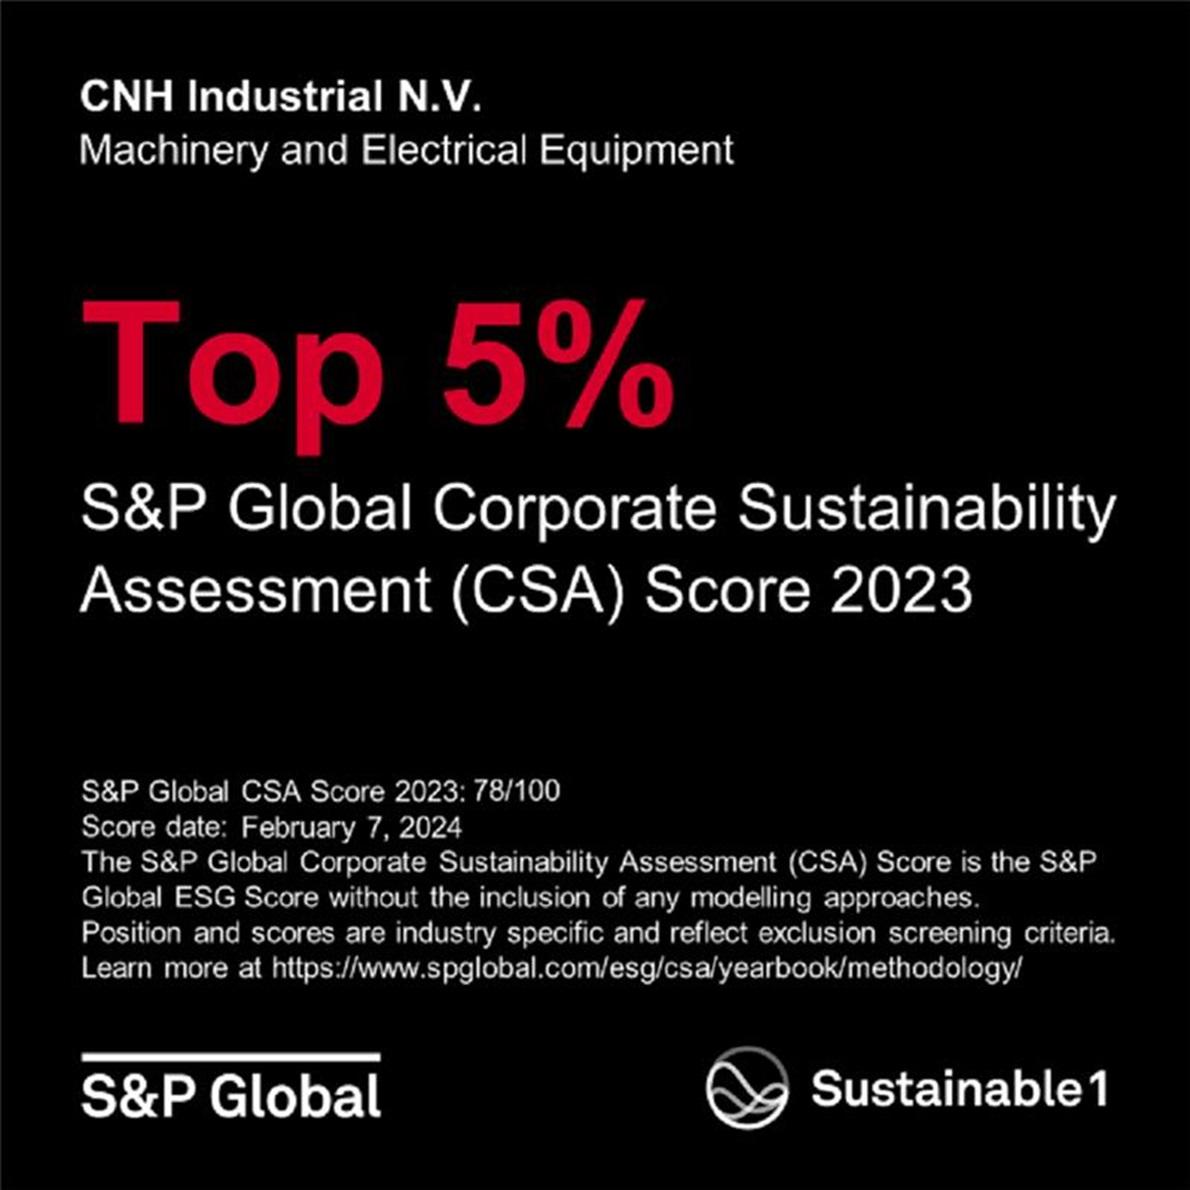 "S&P Global Corporate Sustainability Assessment (CSA) Score 2023"